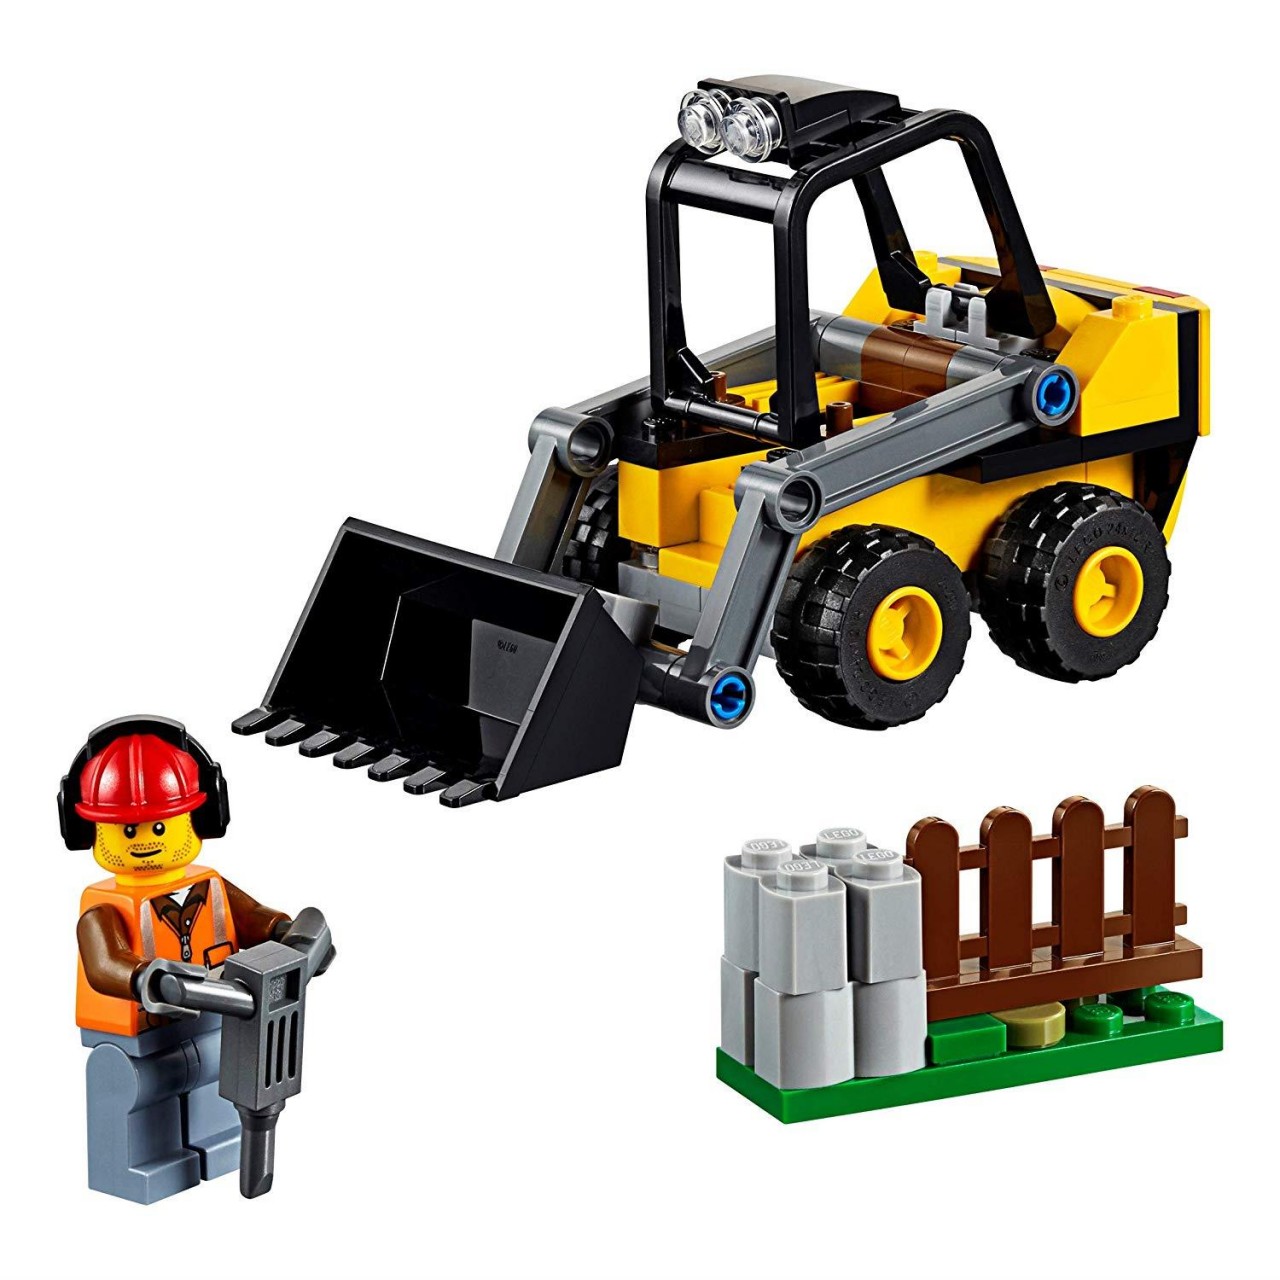 LEGO CITY 60219 Frontlader